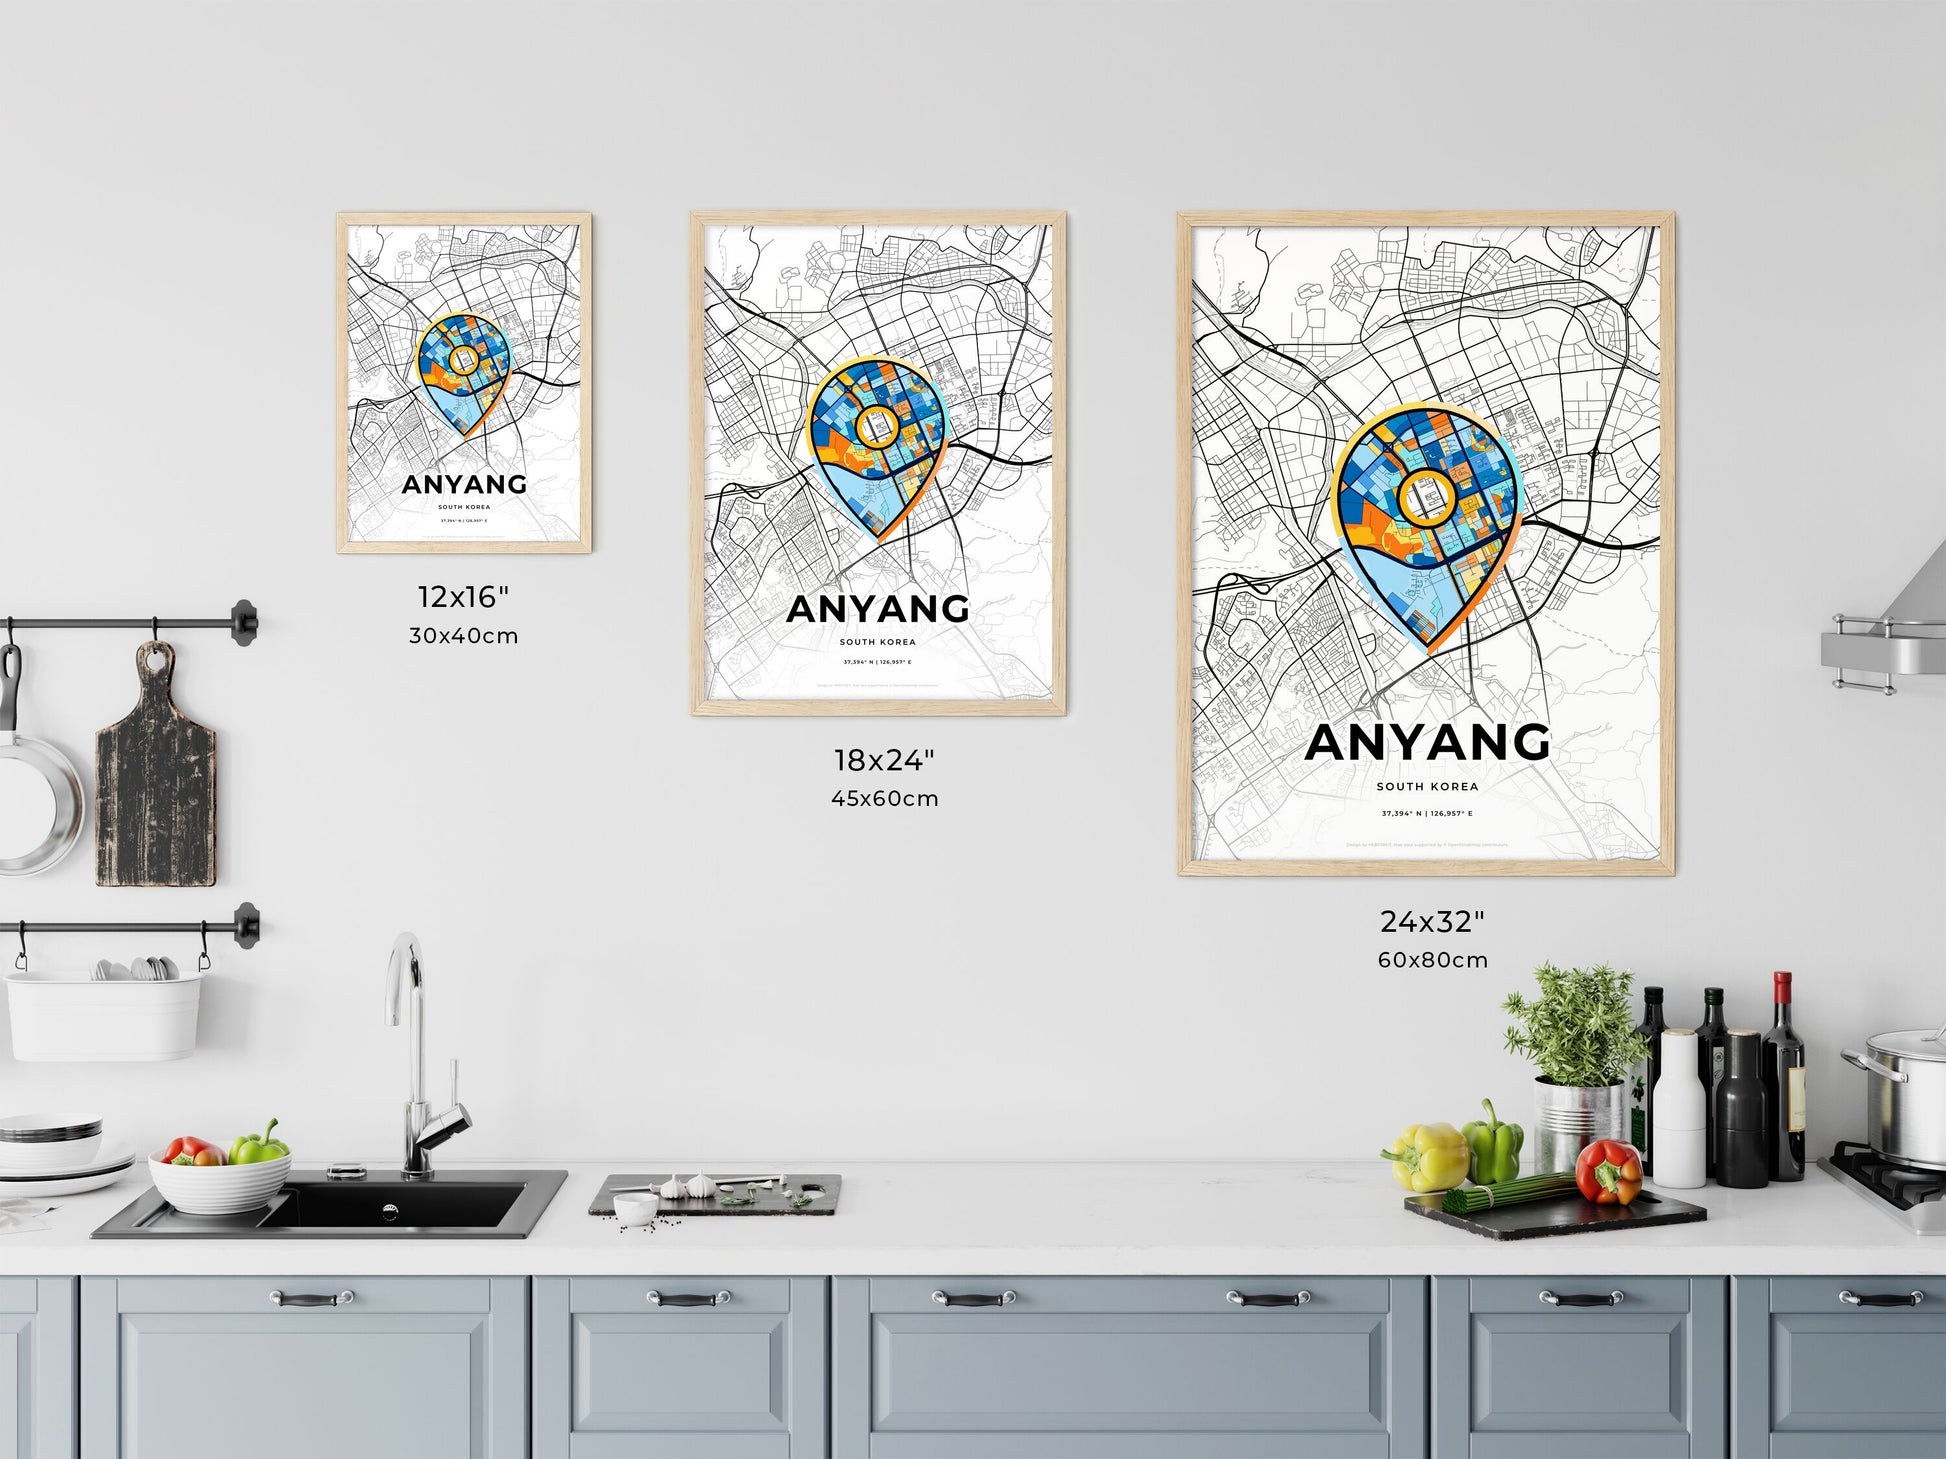 ANYANG SOUTH KOREA minimal art map with a colorful icon. Where it all began, Couple map gift.